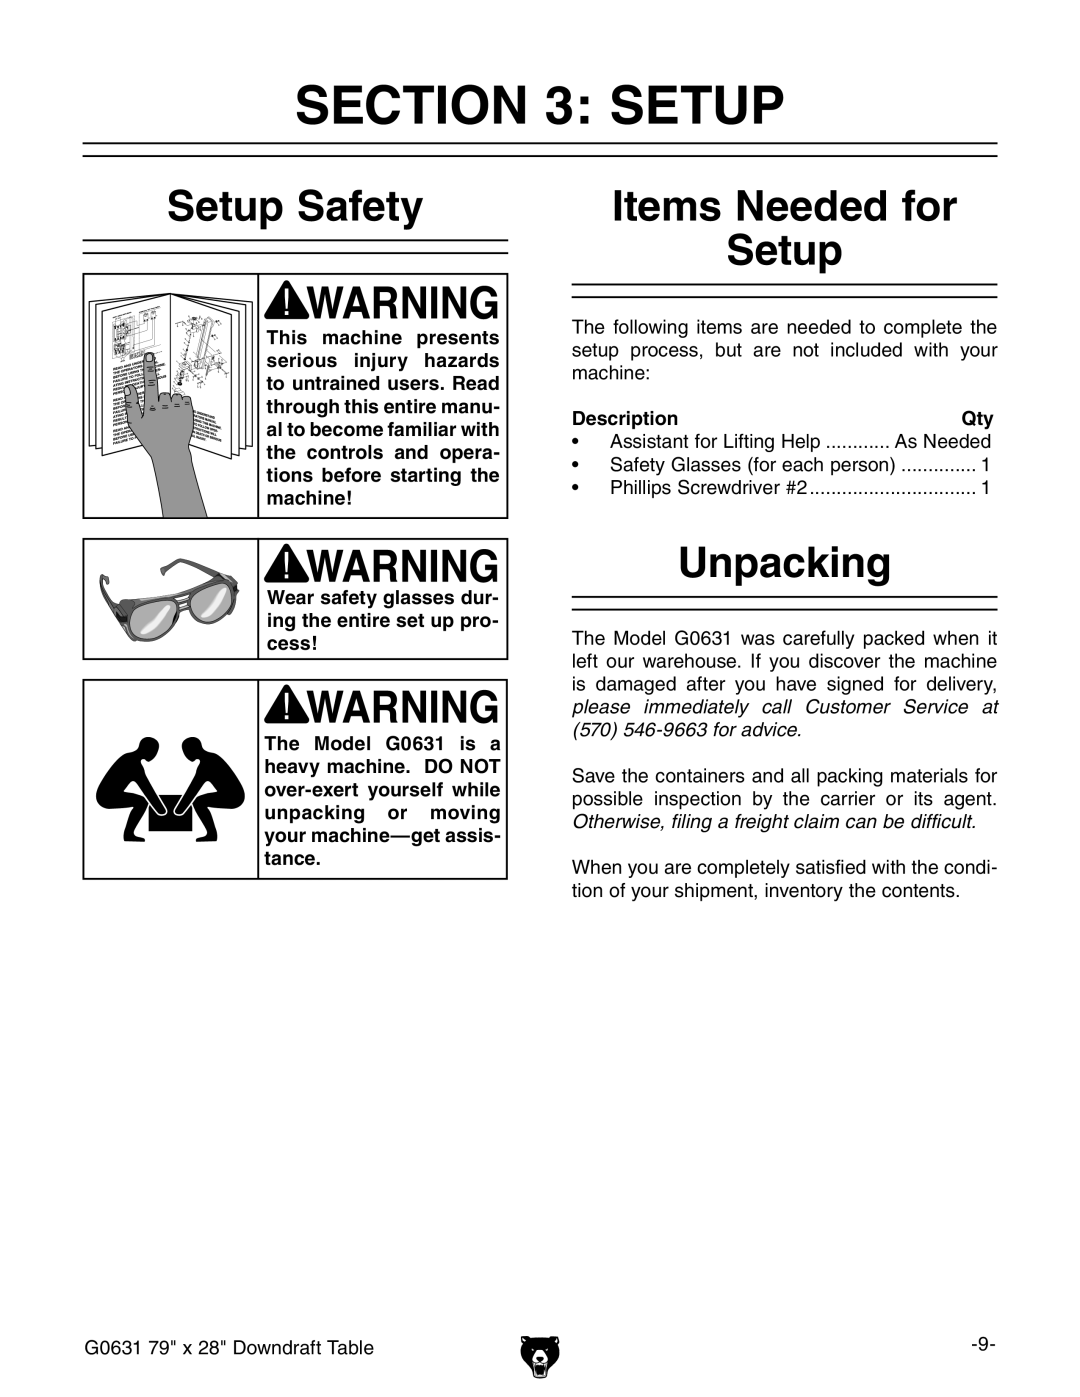 Grizzly G0631 owner manual Setup Safety, Items Needed for Setup, Unpacking 